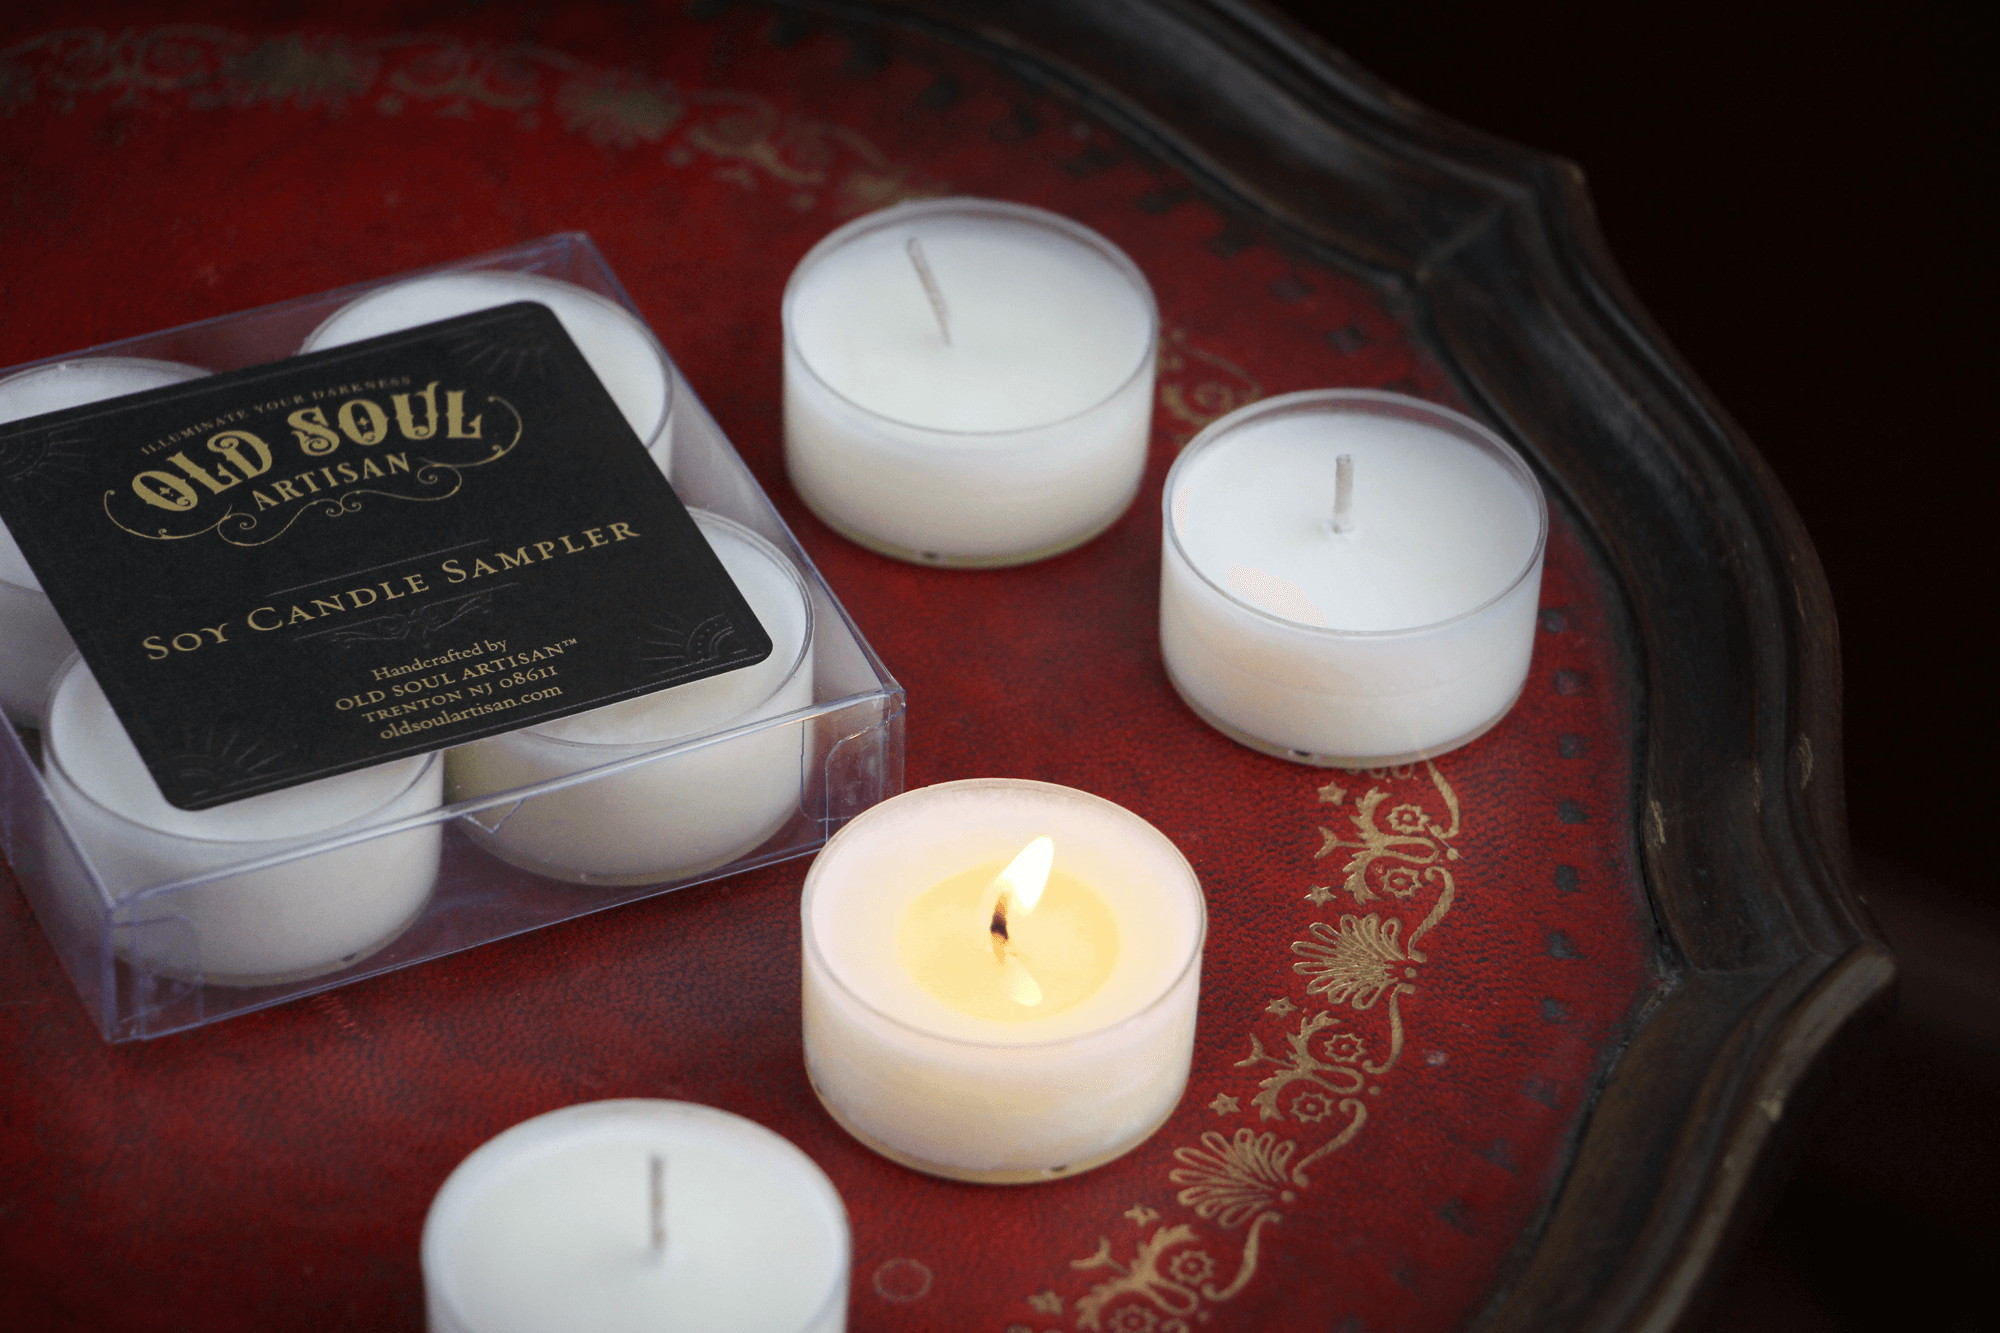 Illuminate Your Soul Scented Soy Candle Aromatherapy 